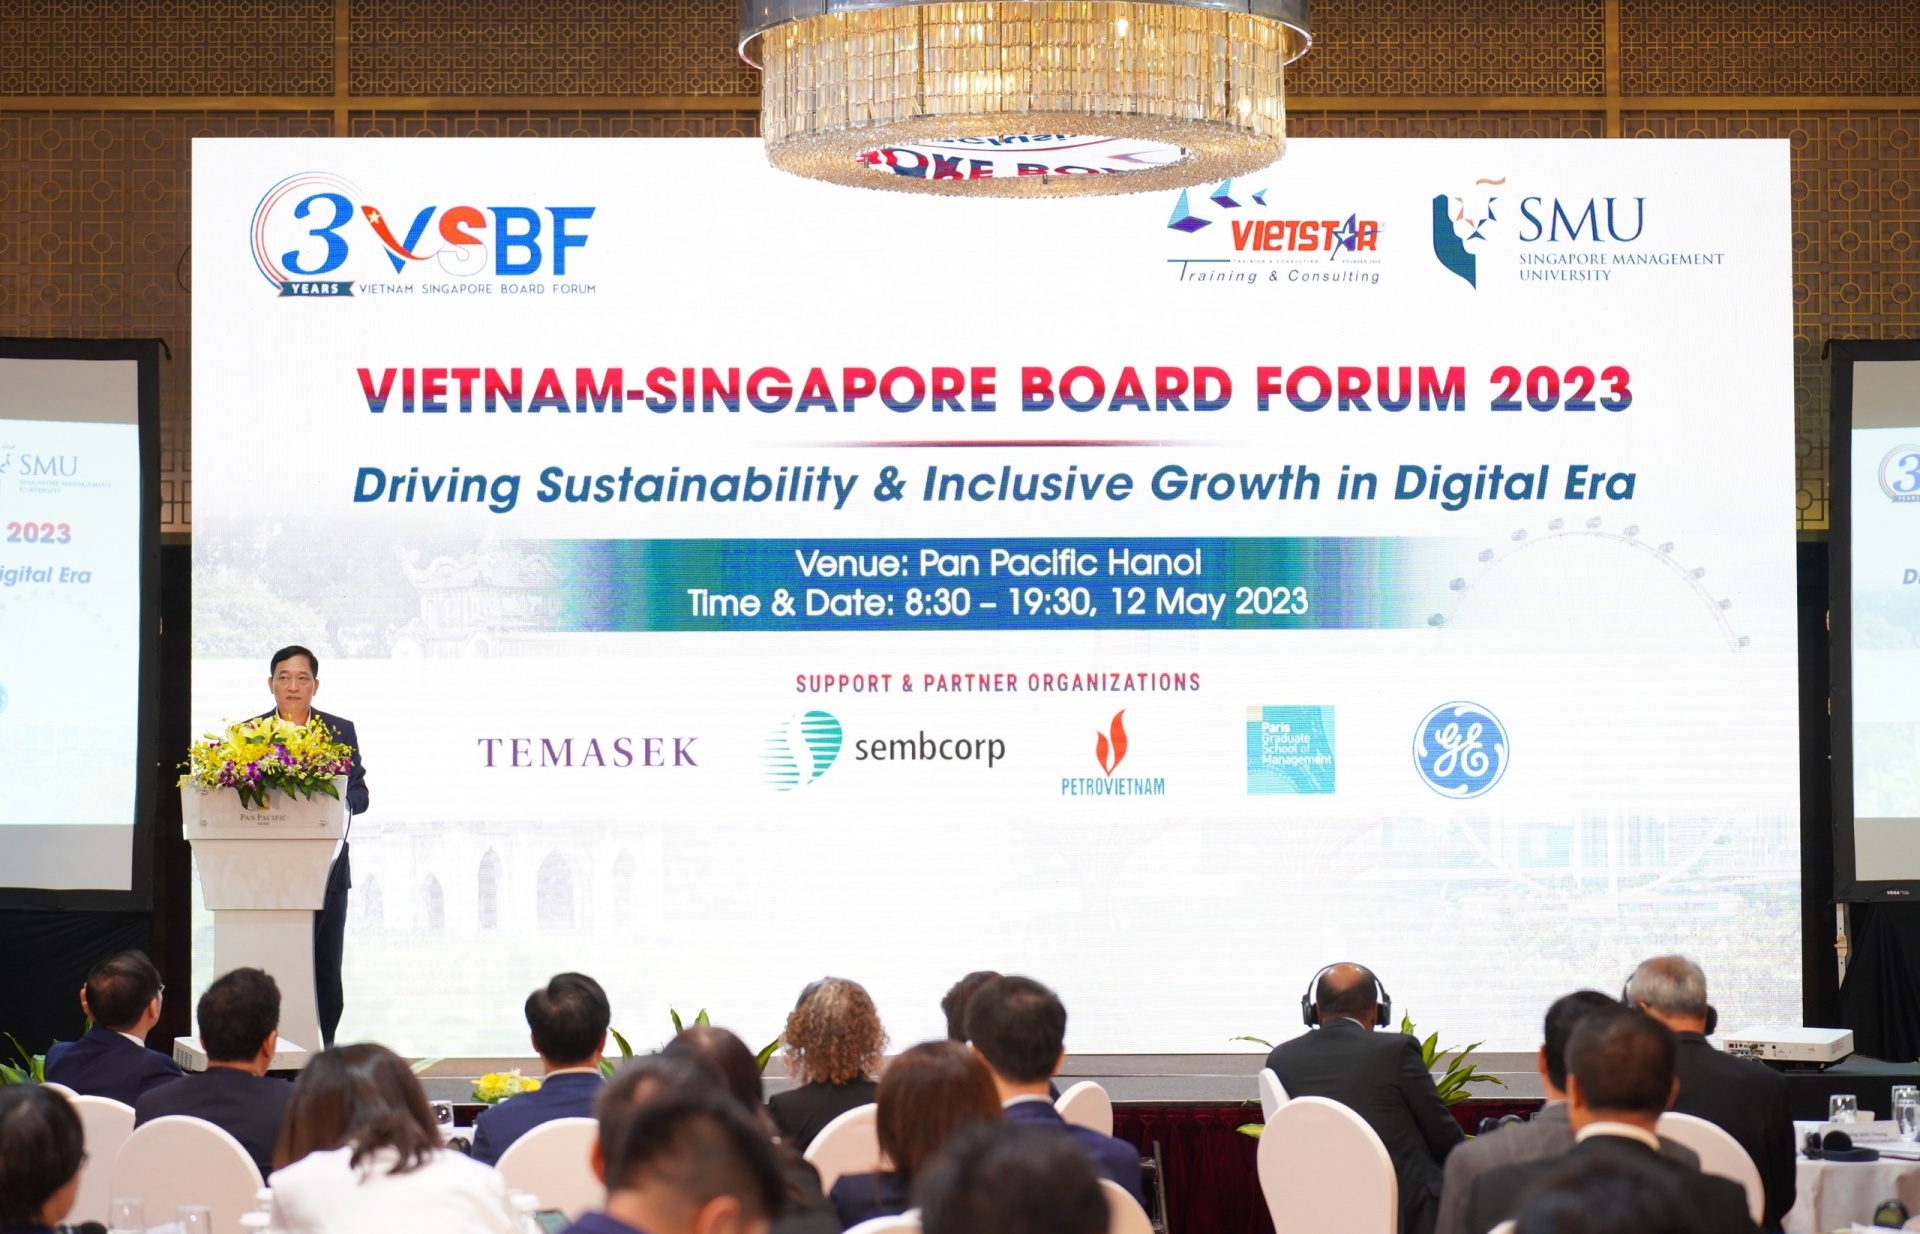 vsbf 2023 driving vietnamese firms on sustainability and inclusive growth